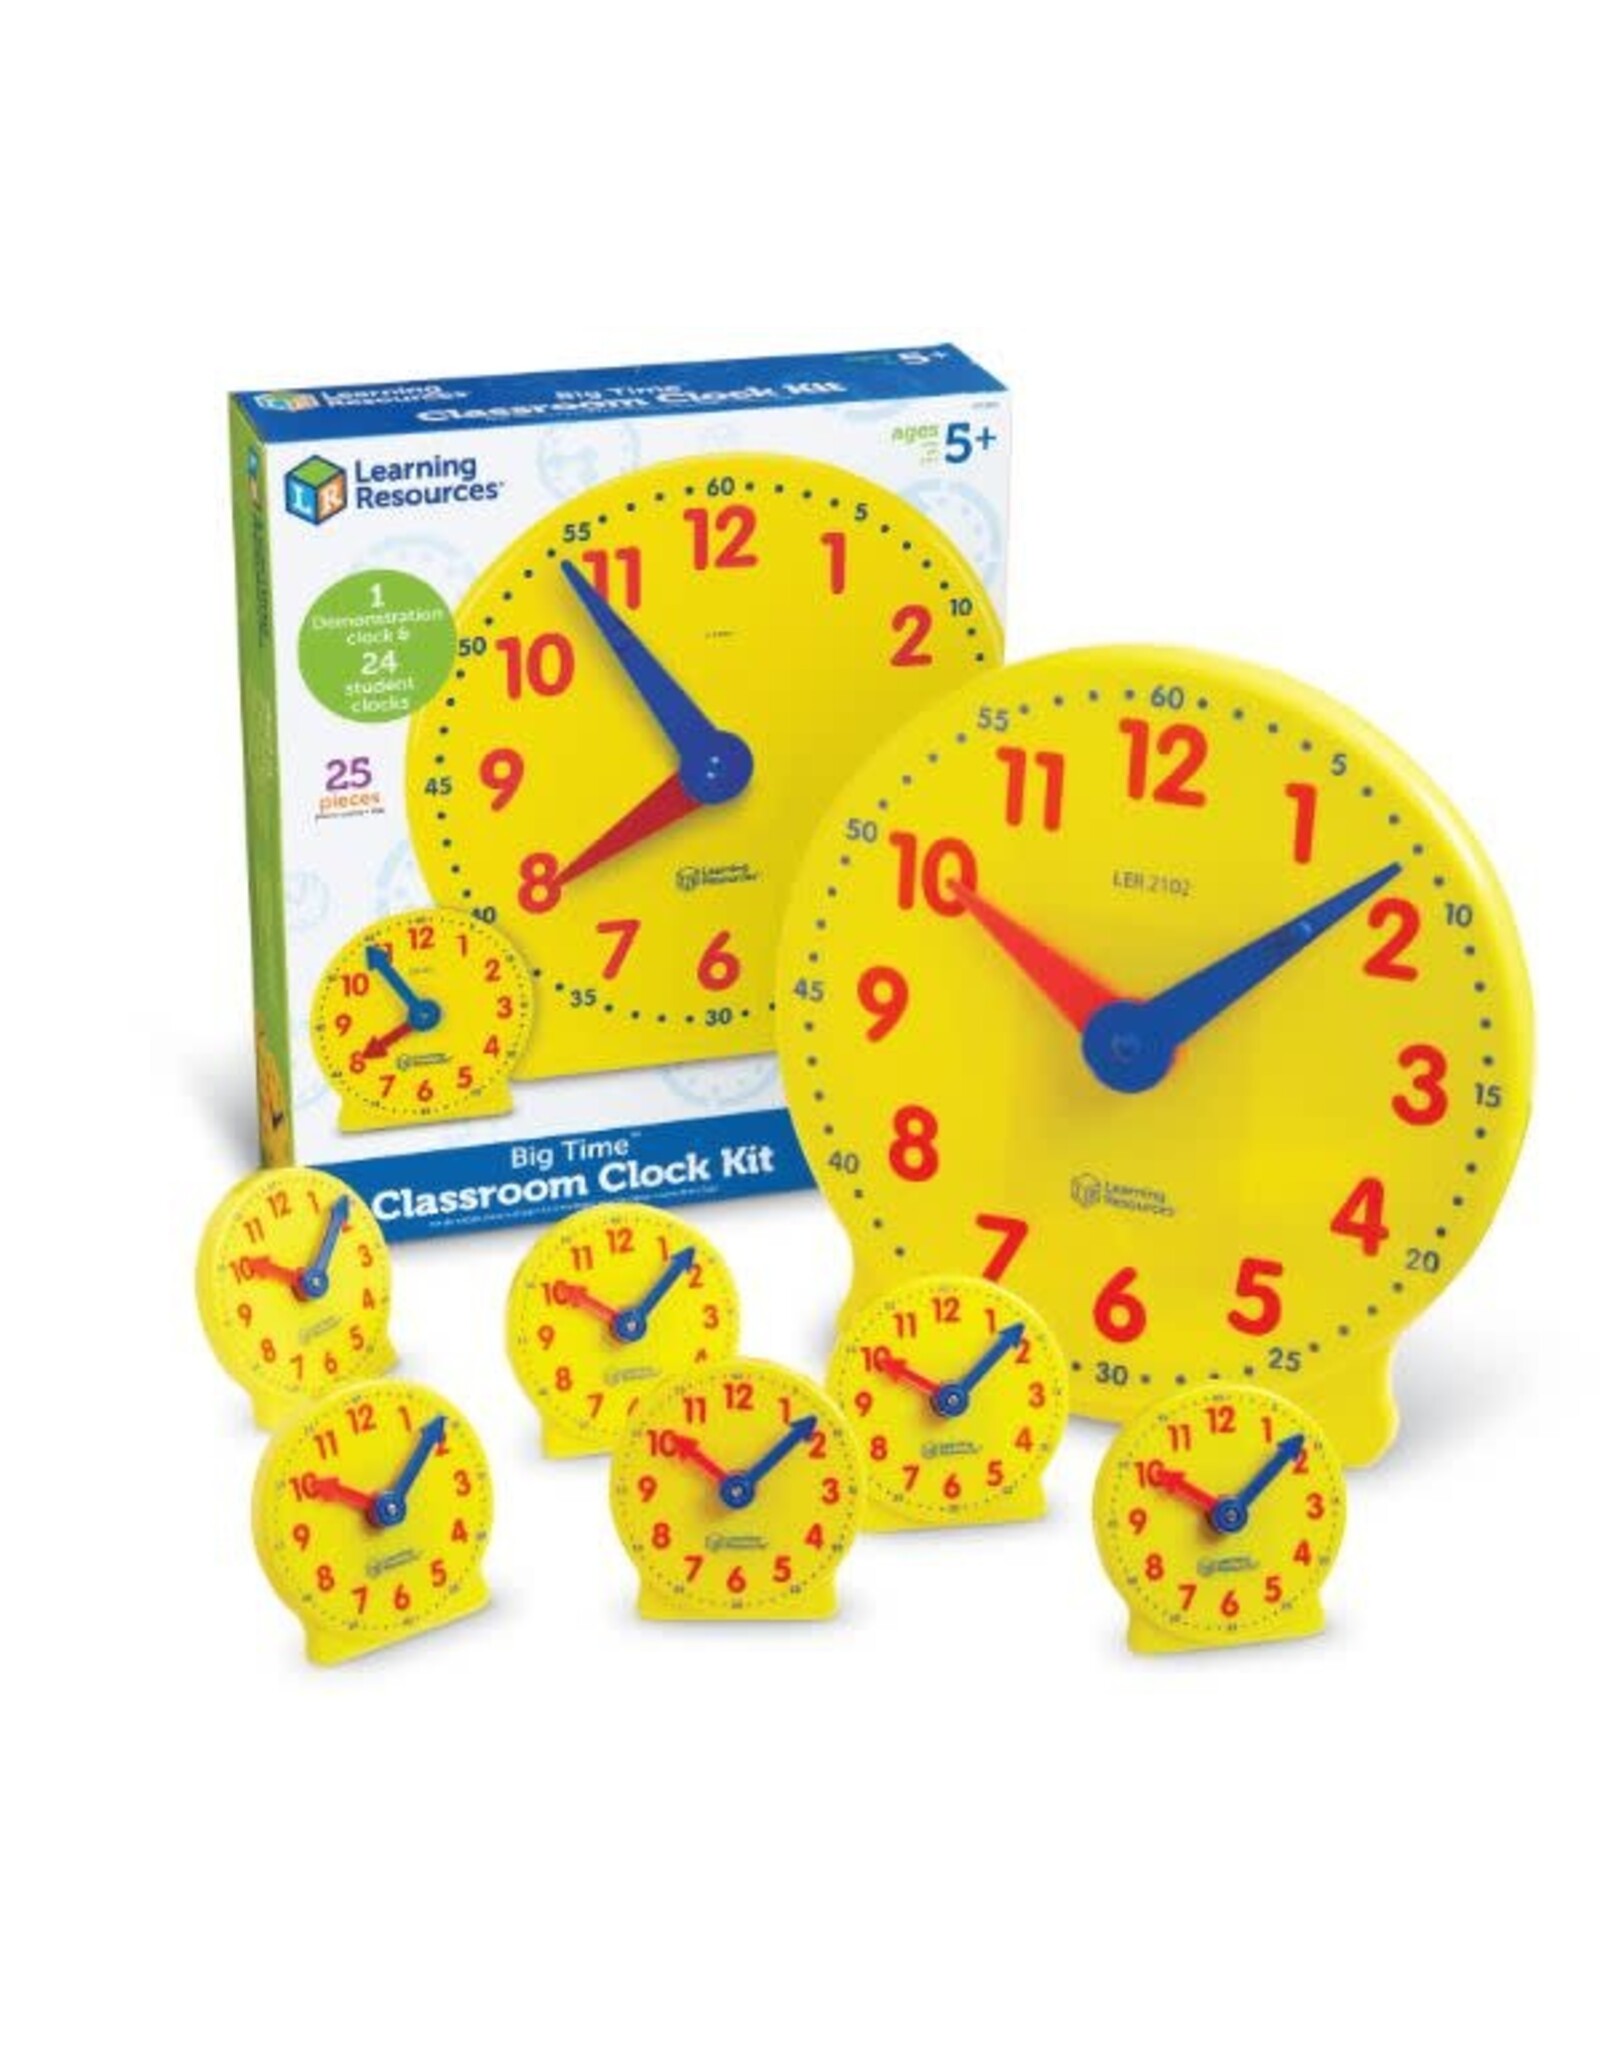 Learning Resources CLASSROOM CLOCK SET 25 PACK